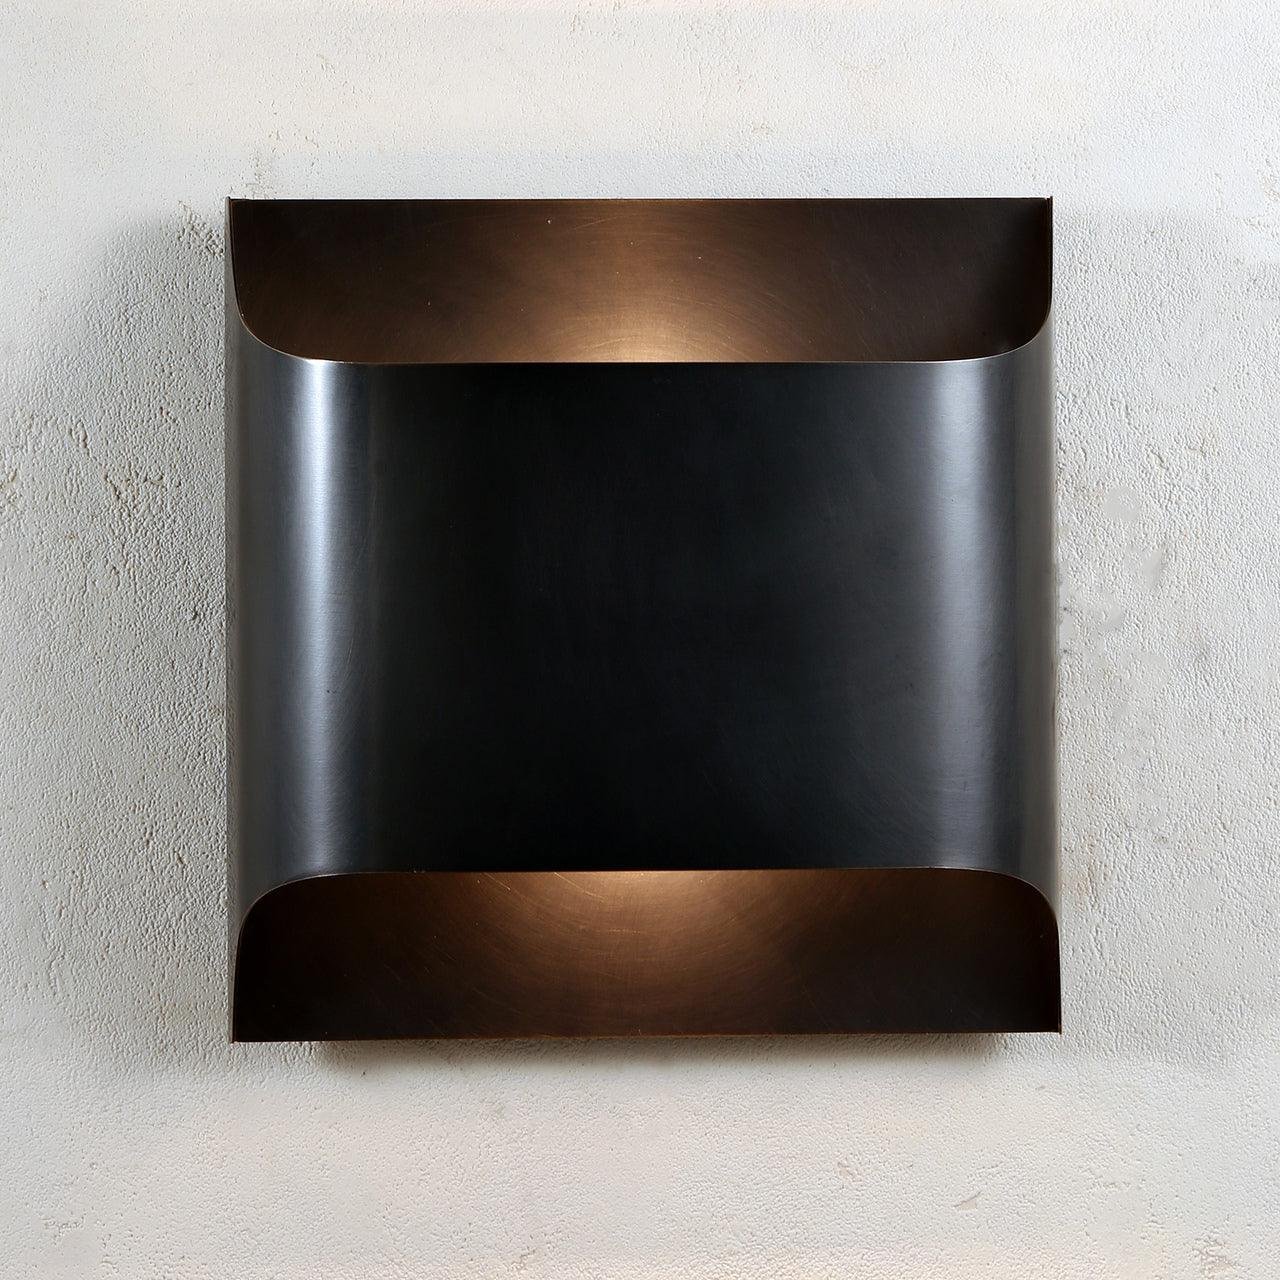 Blacked Leclerc Sconce with a Diameter of 25cm and Height of 25cm, Sold in Sets of 2